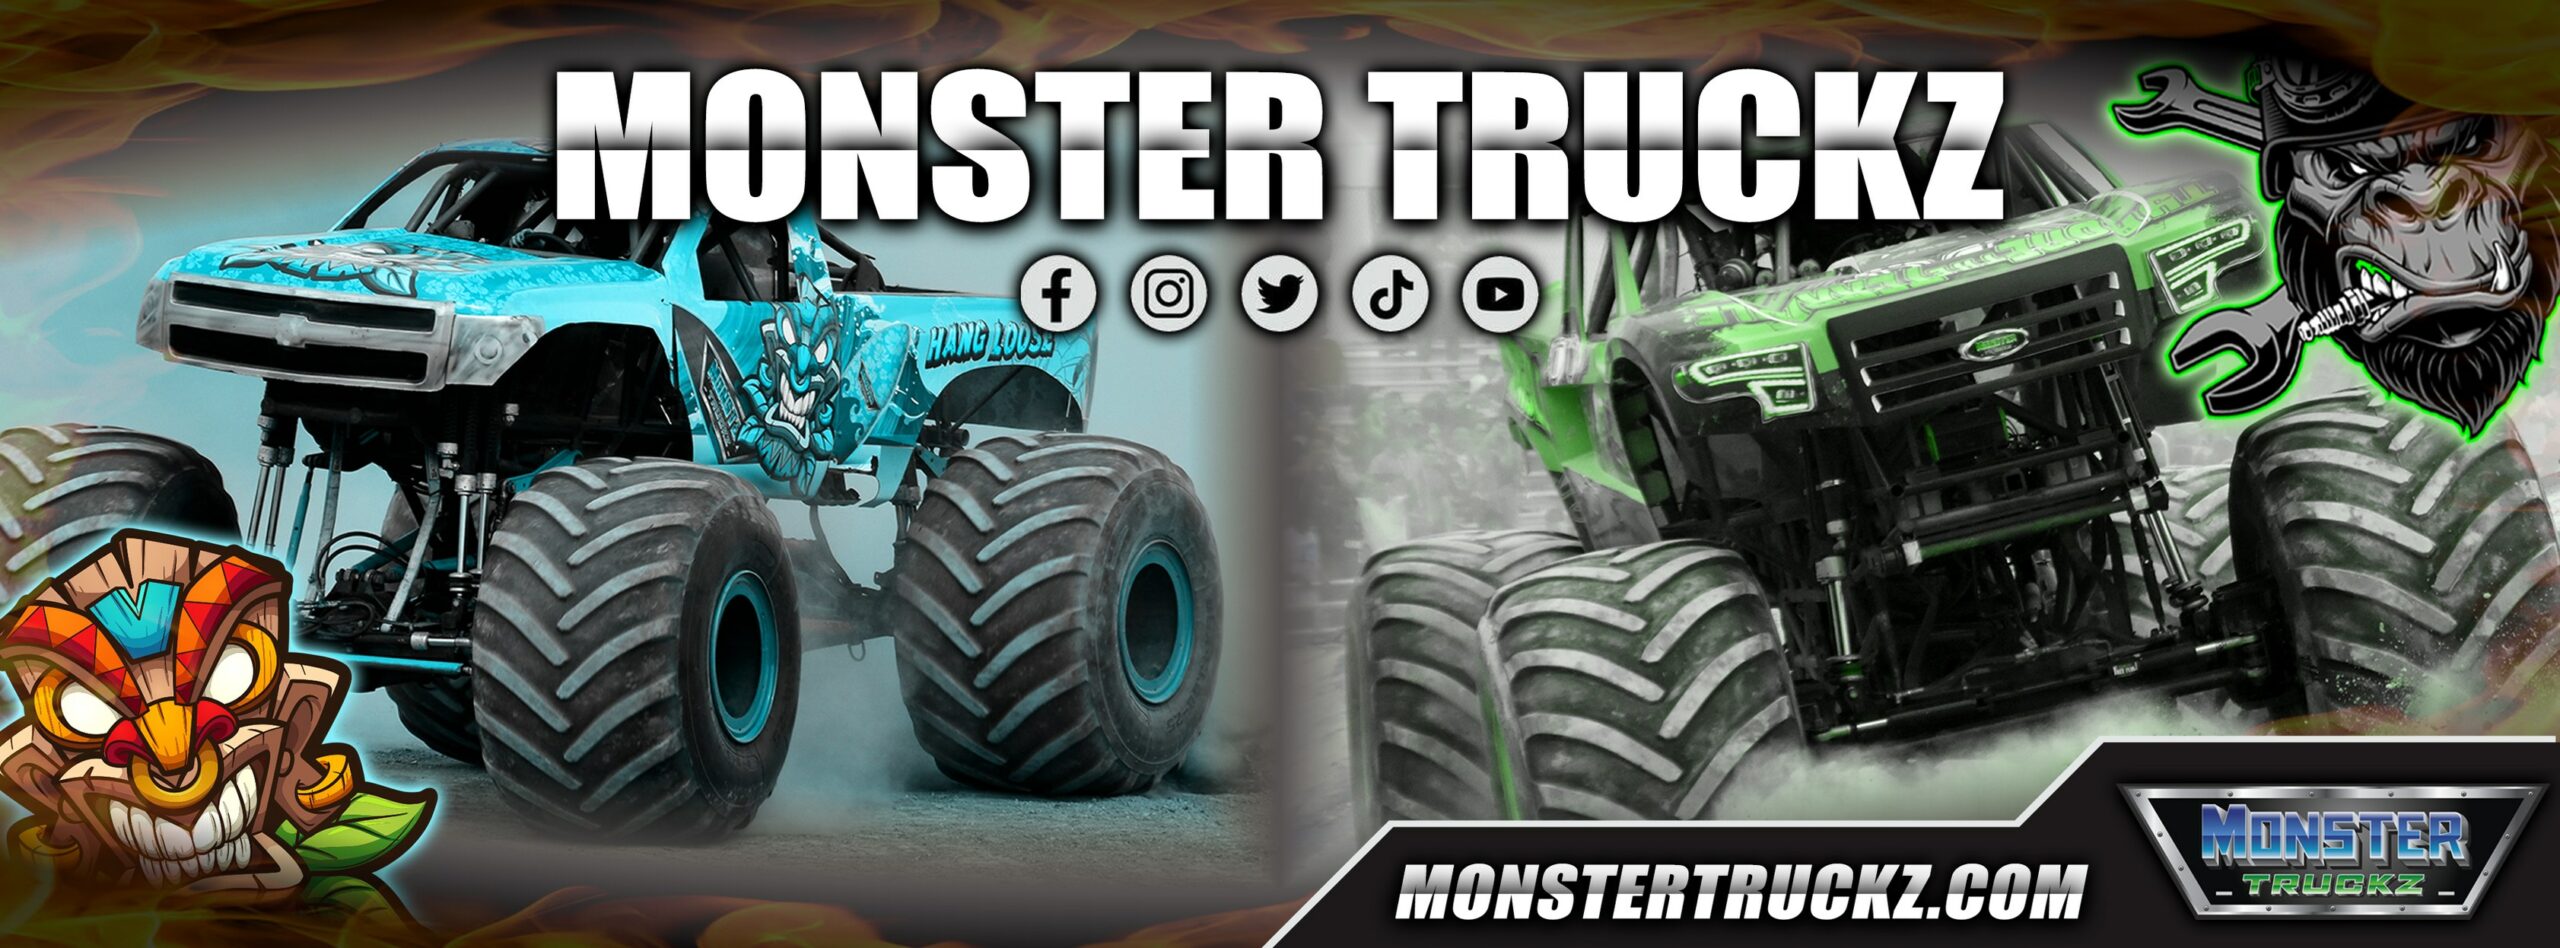 Monster Truckz Show At East Bay Raceway Will Blow Your Mind Osprey